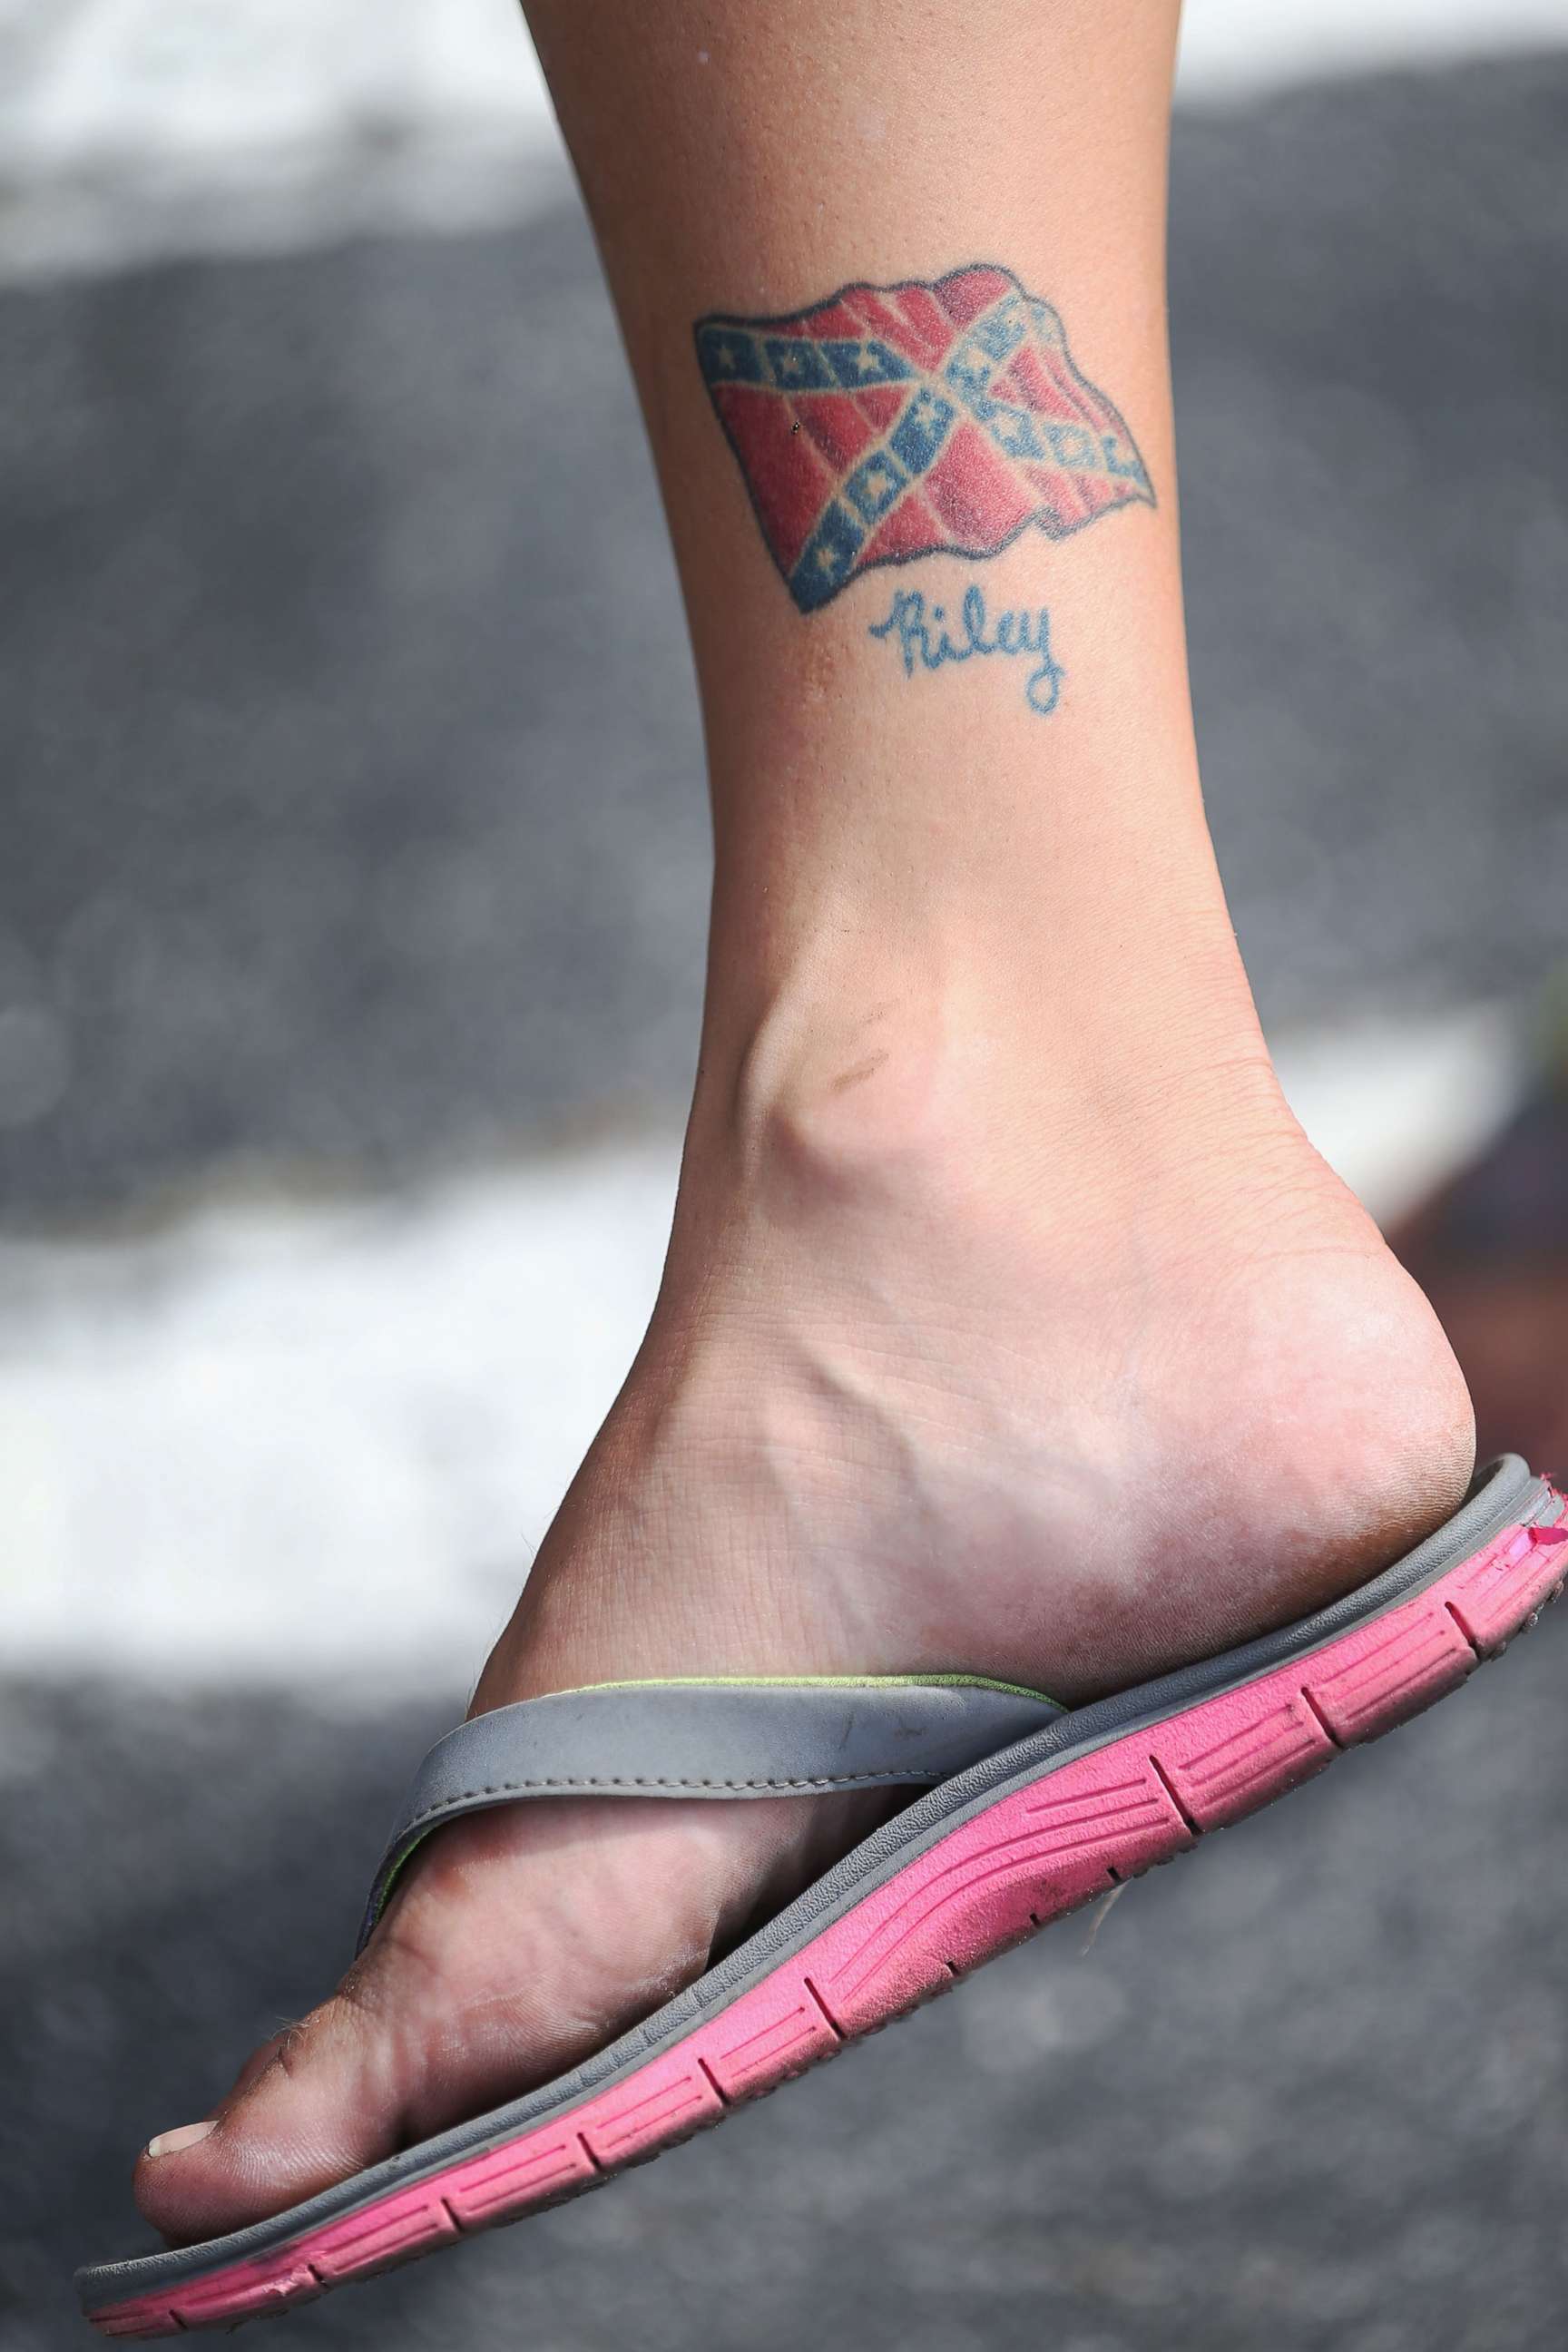 PHOTO: In this July 11, 2015, file photo, a Confederate flag tattoo is seen on a leg during a rally in Florida.